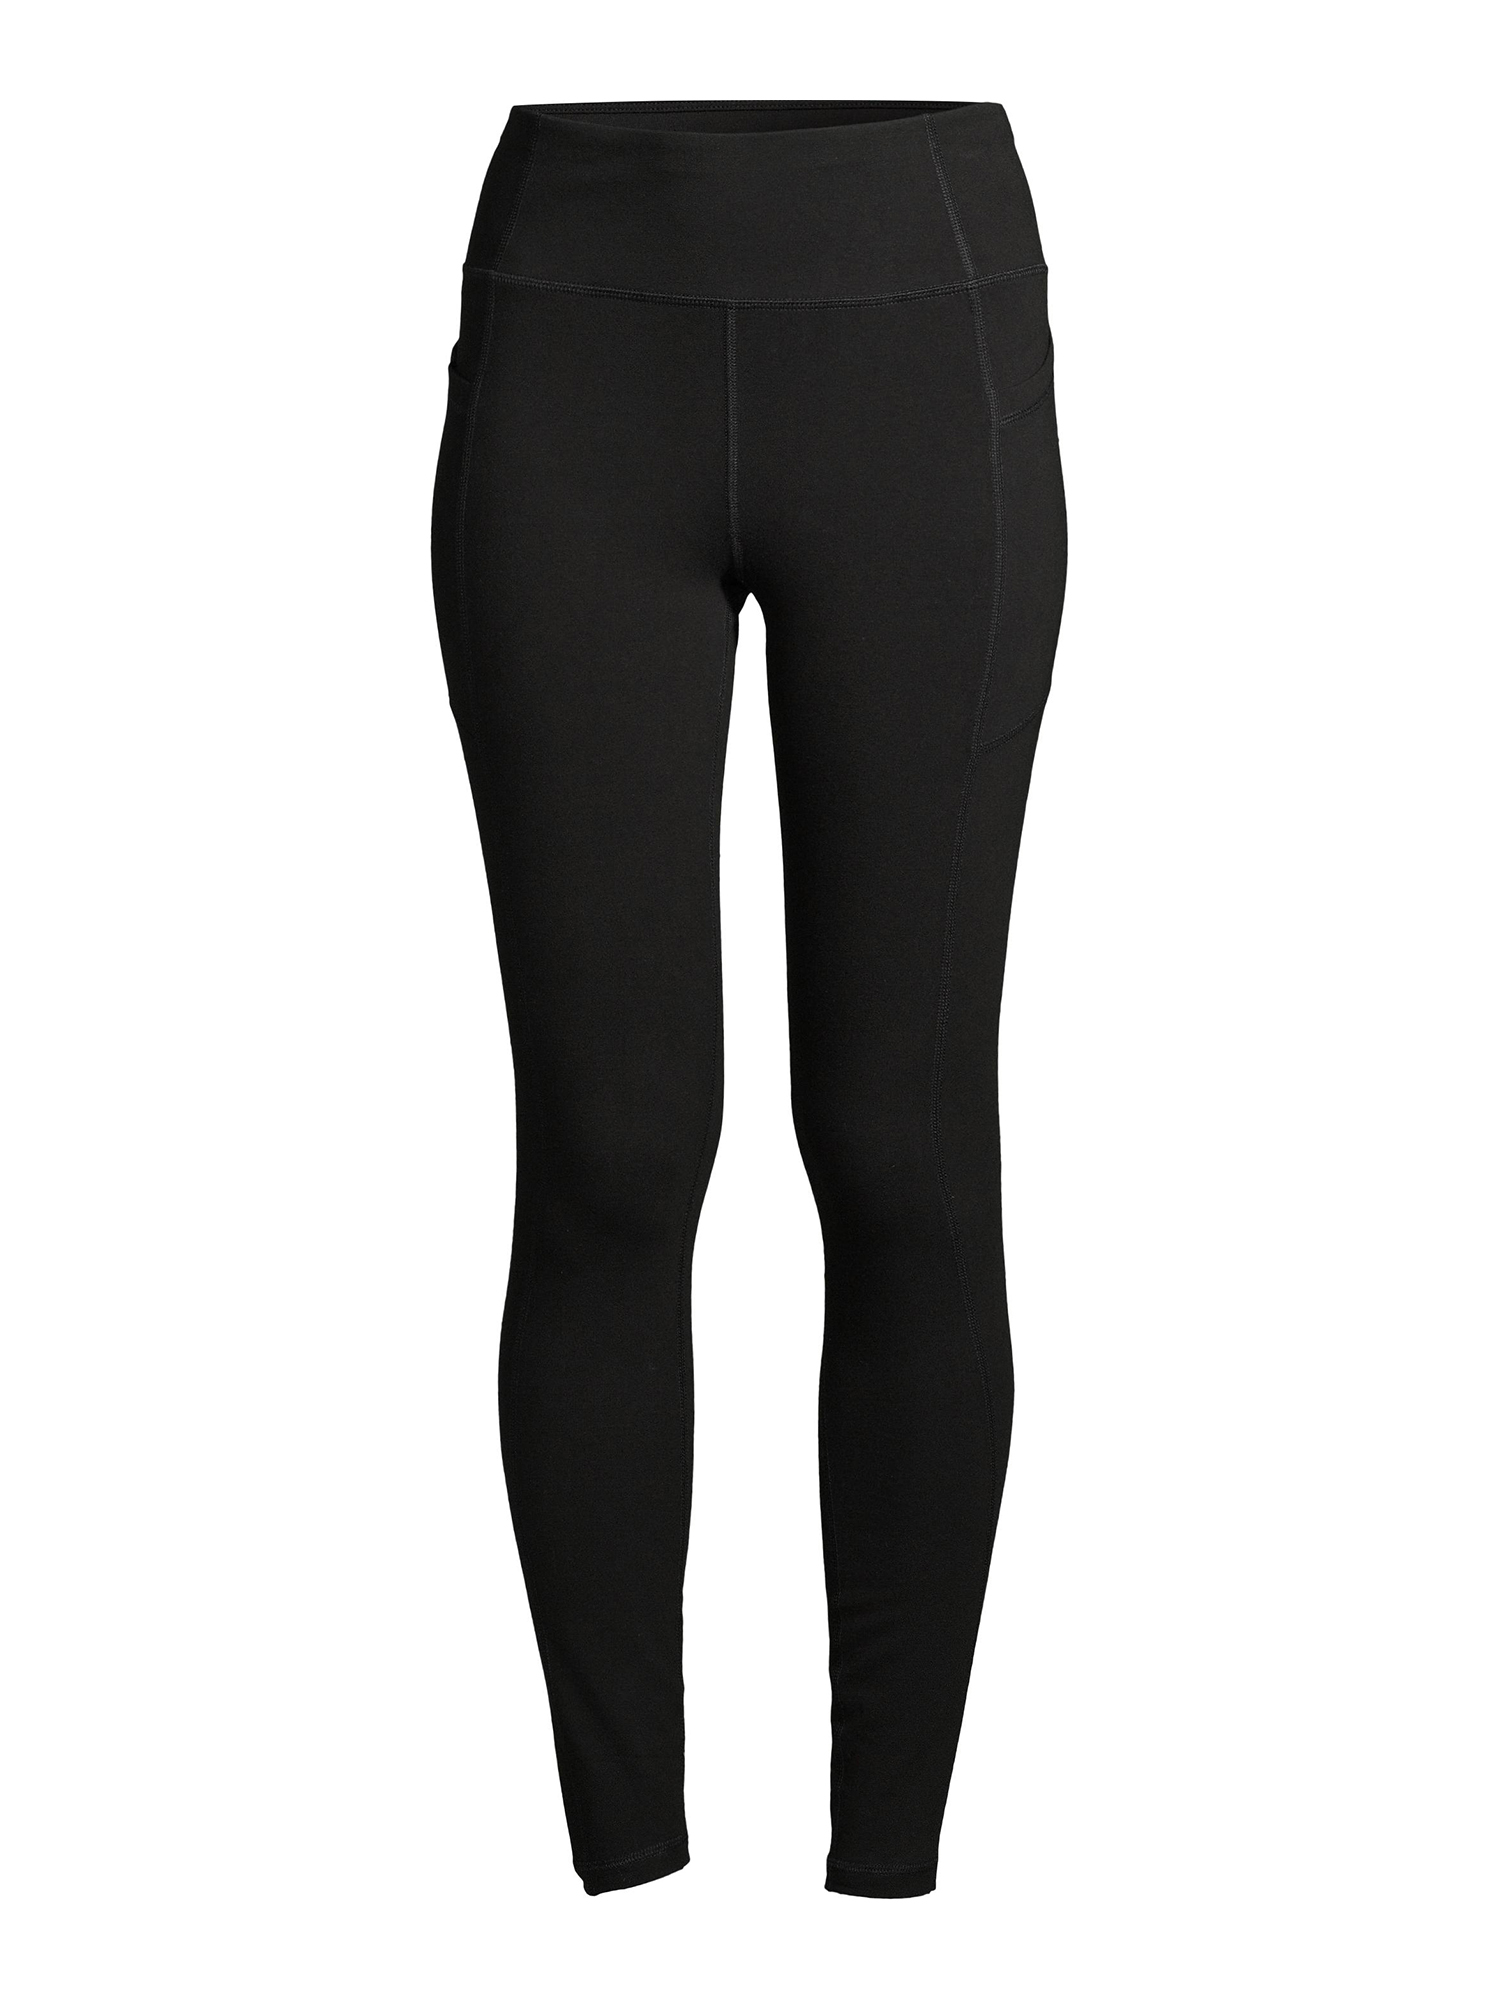 Athletic Works Women' s Ankle Tights with Side Pockets - Walmart.com